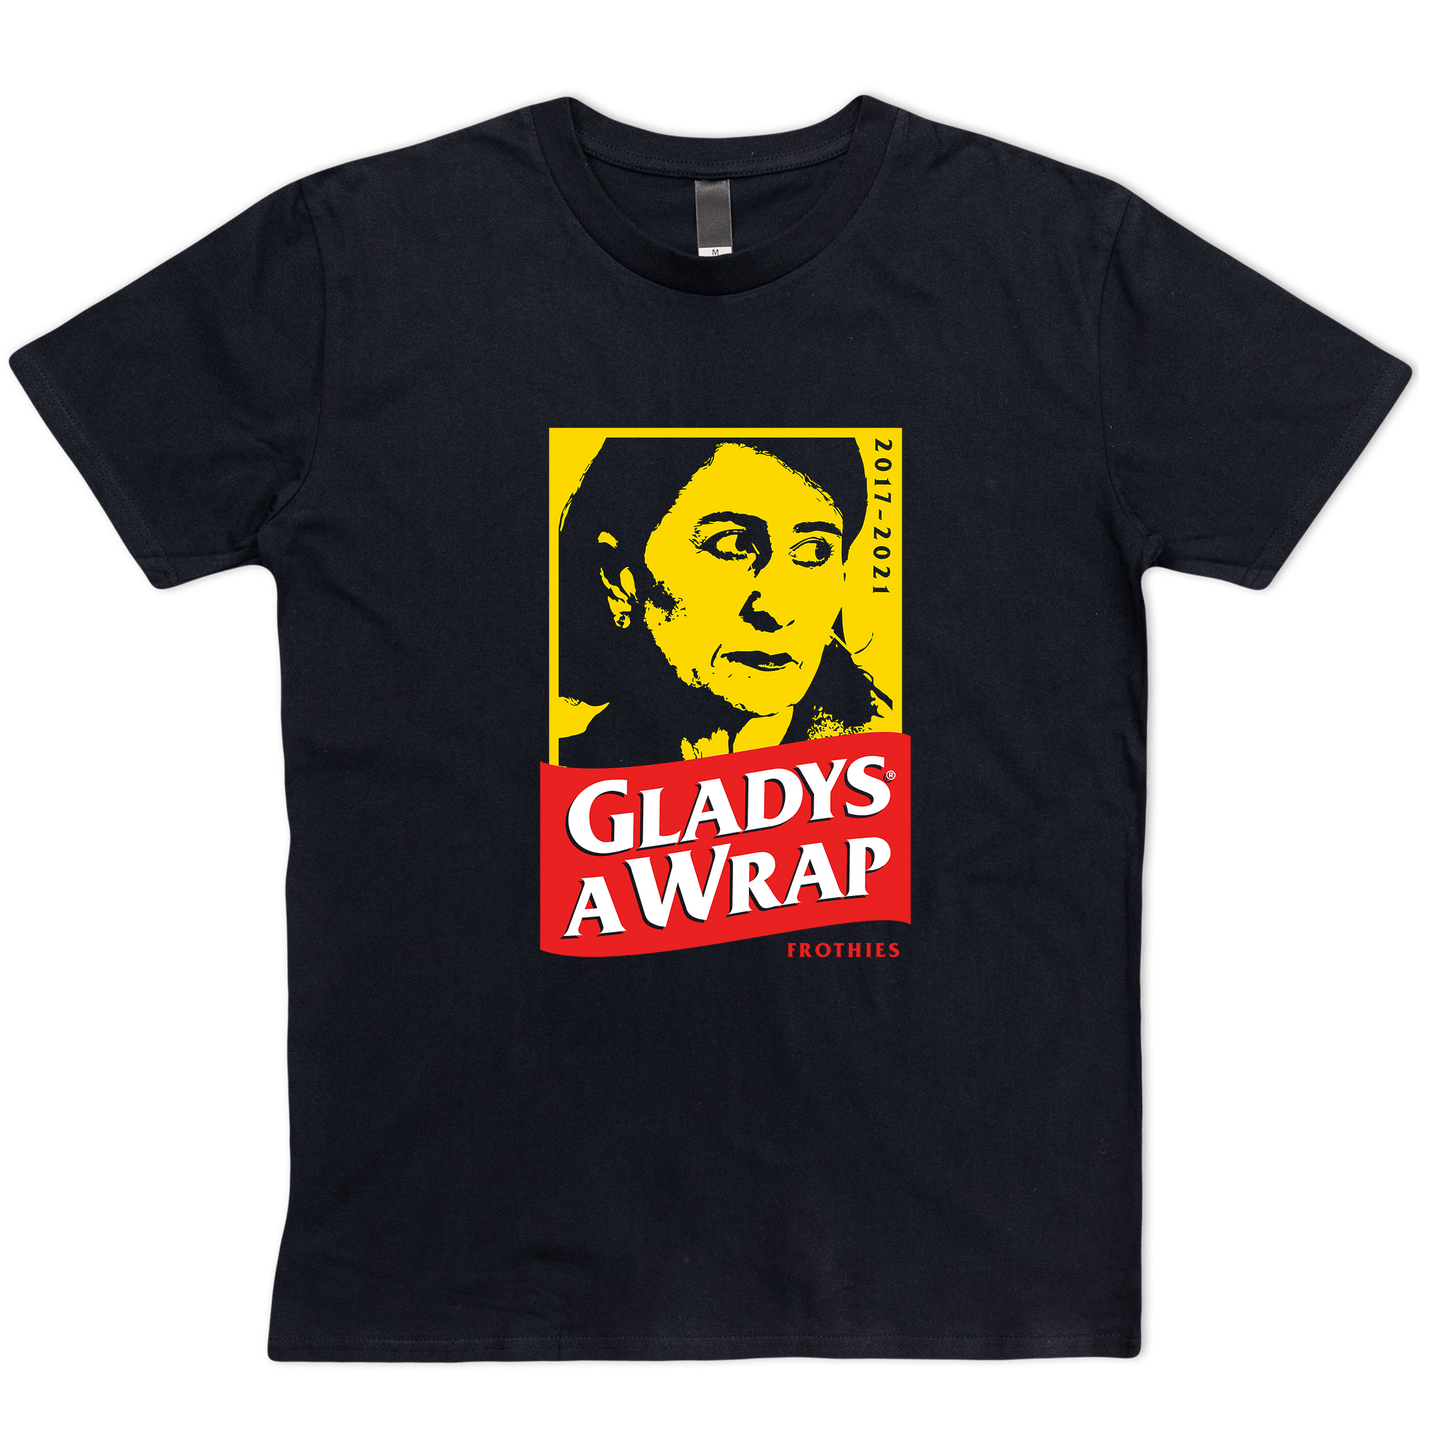 Gladys A Wrap Tee Clothing Frothies